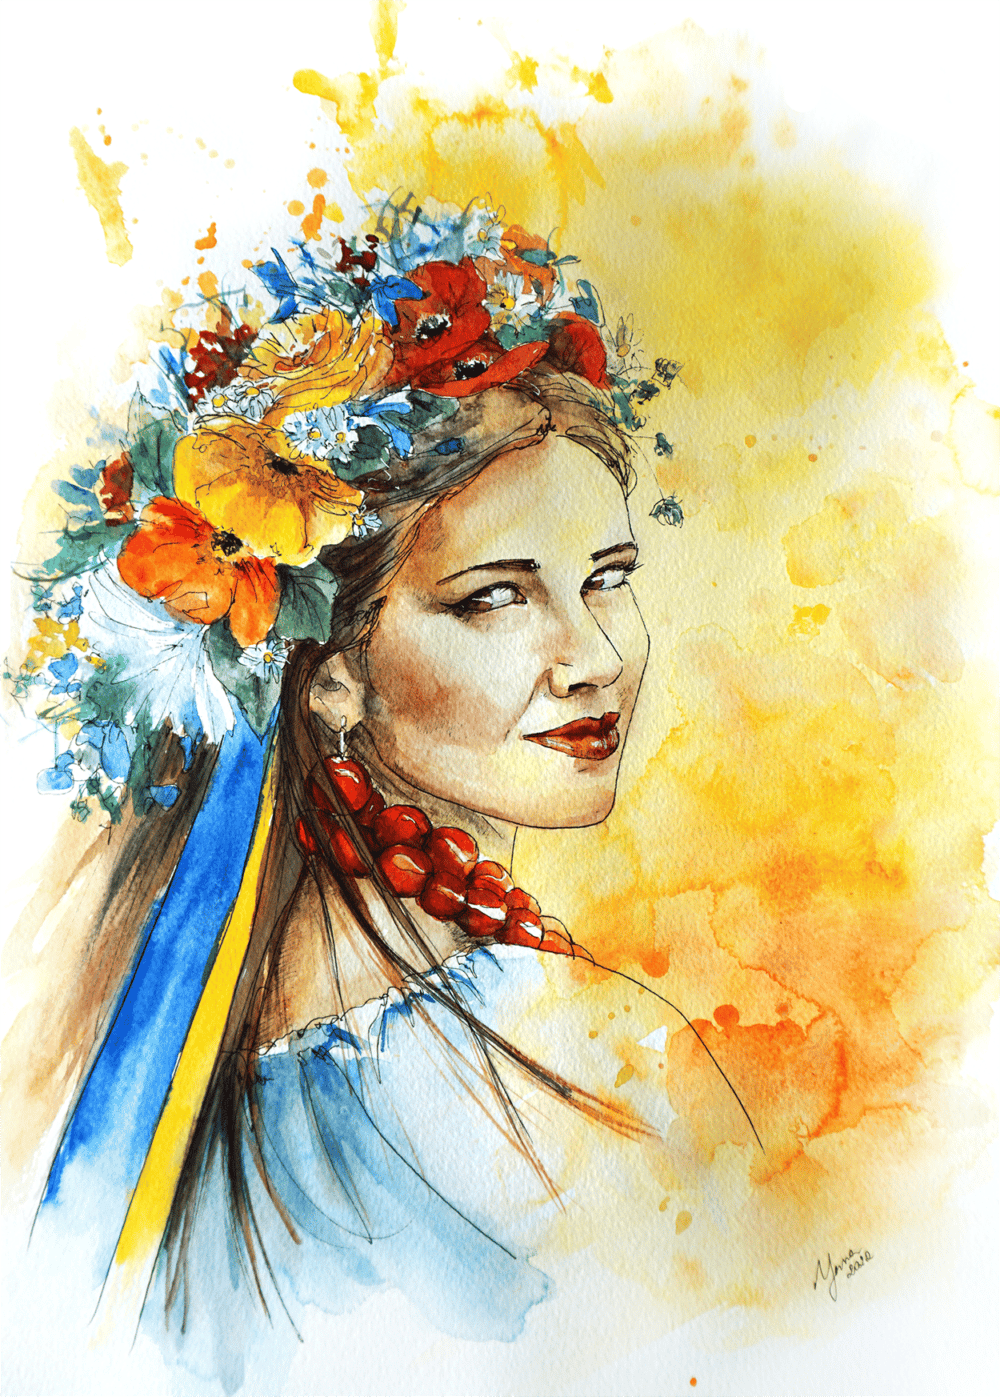 portrait of a woman from Ukraine painted in watercolor